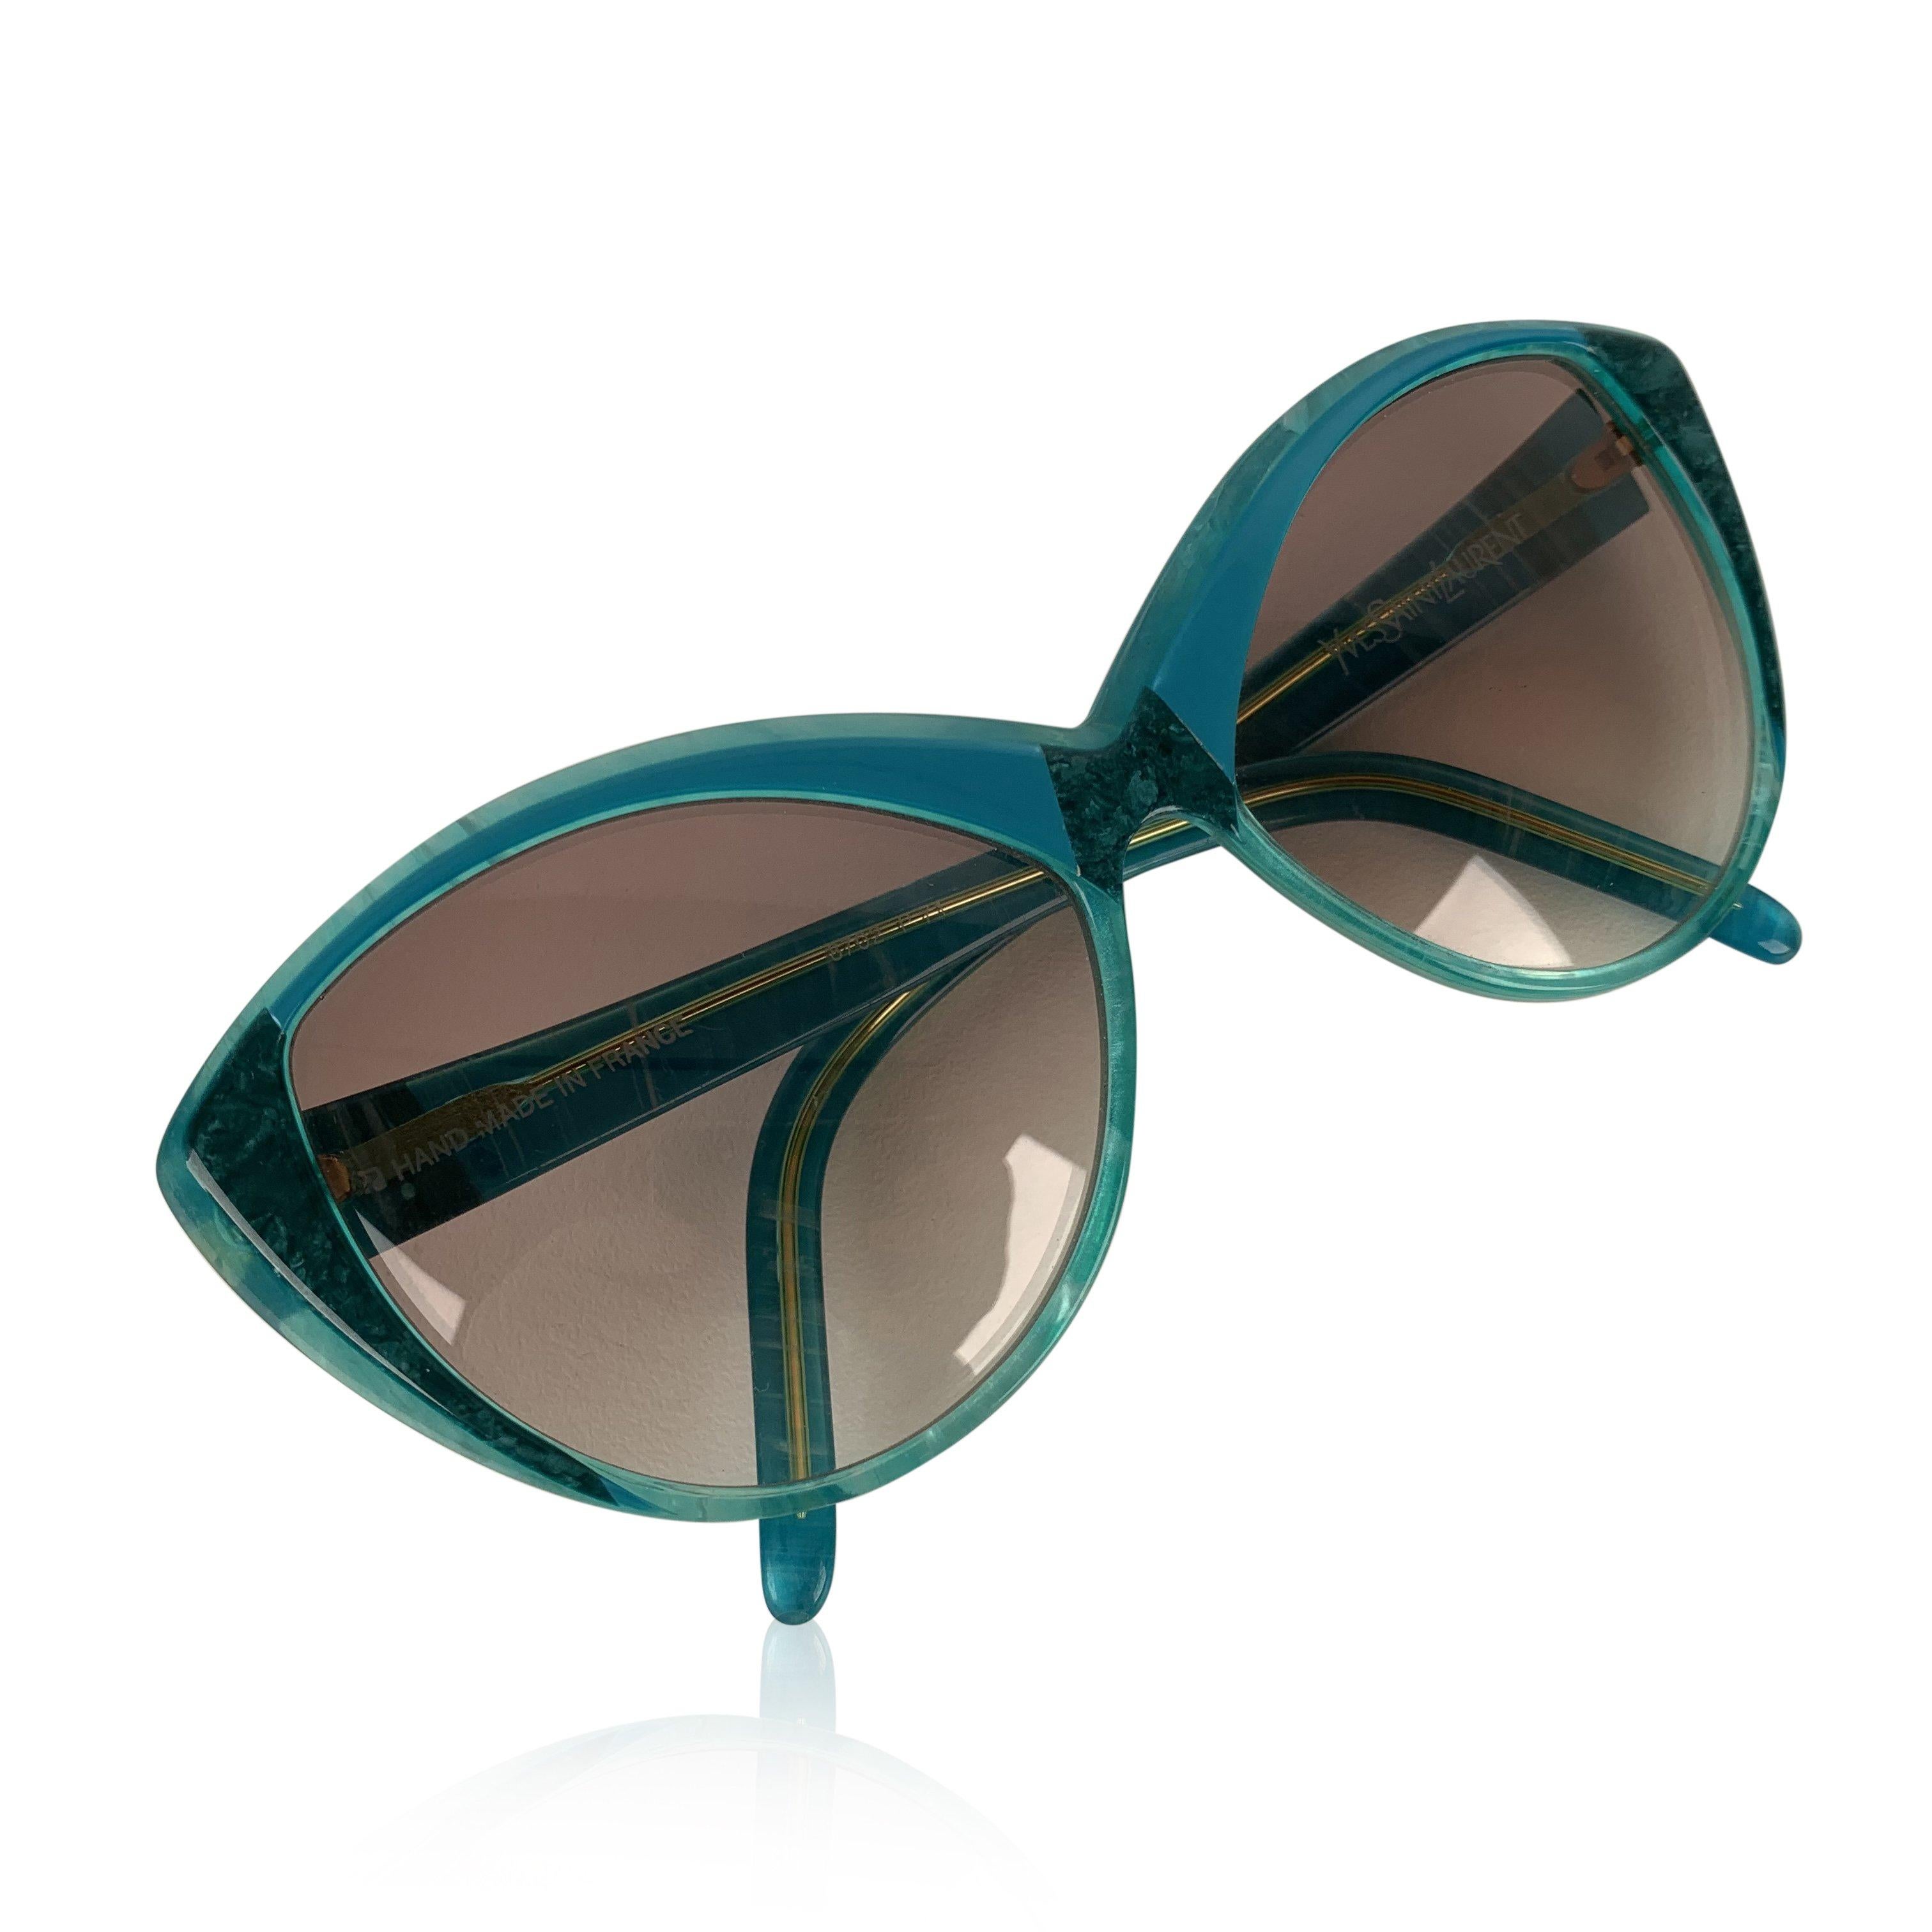 MATERIAL: Acetate COLOR: Turquoise MODEL: 8702 P 71 GENDER: Women SIZE: Medium COUNTRY OF MANUFACTURE: France Condition CONDITION DETAILS: NOS - New Old Stock - Never worn or Used - They will come with a GENERIC Case Measurements MEASUREMENTS: